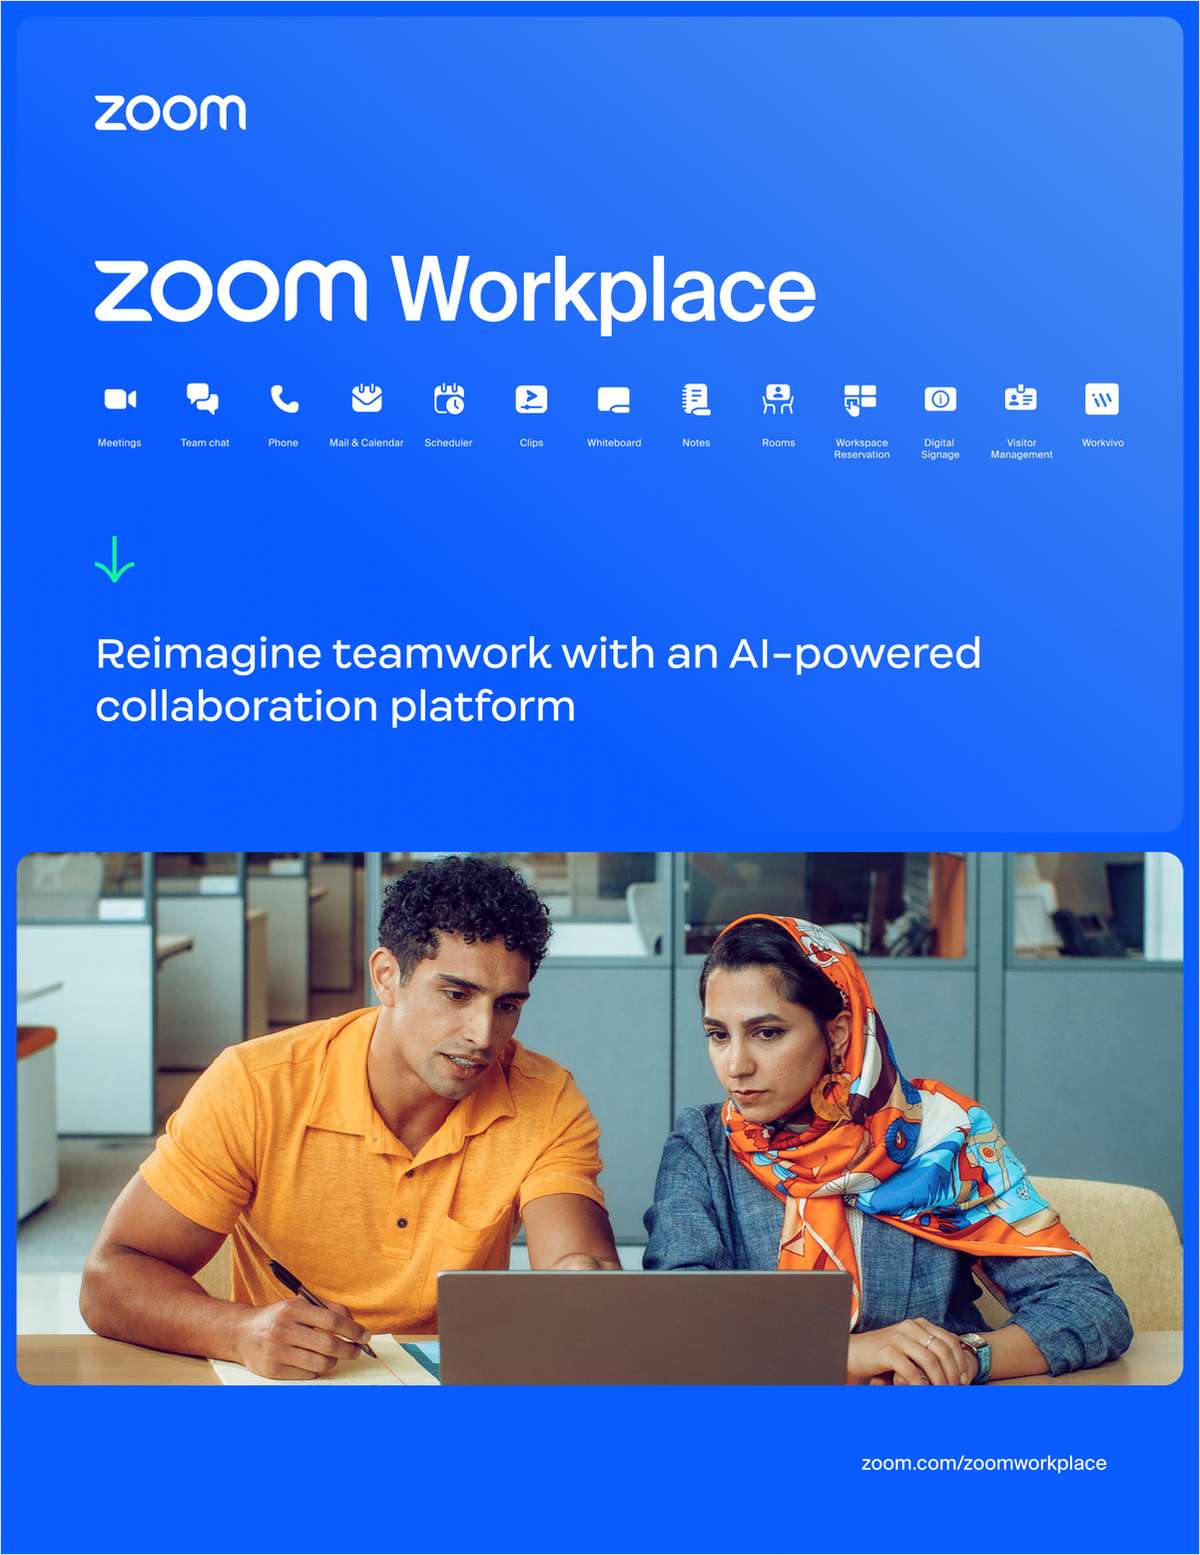 Zoom Workplace Solution Brief